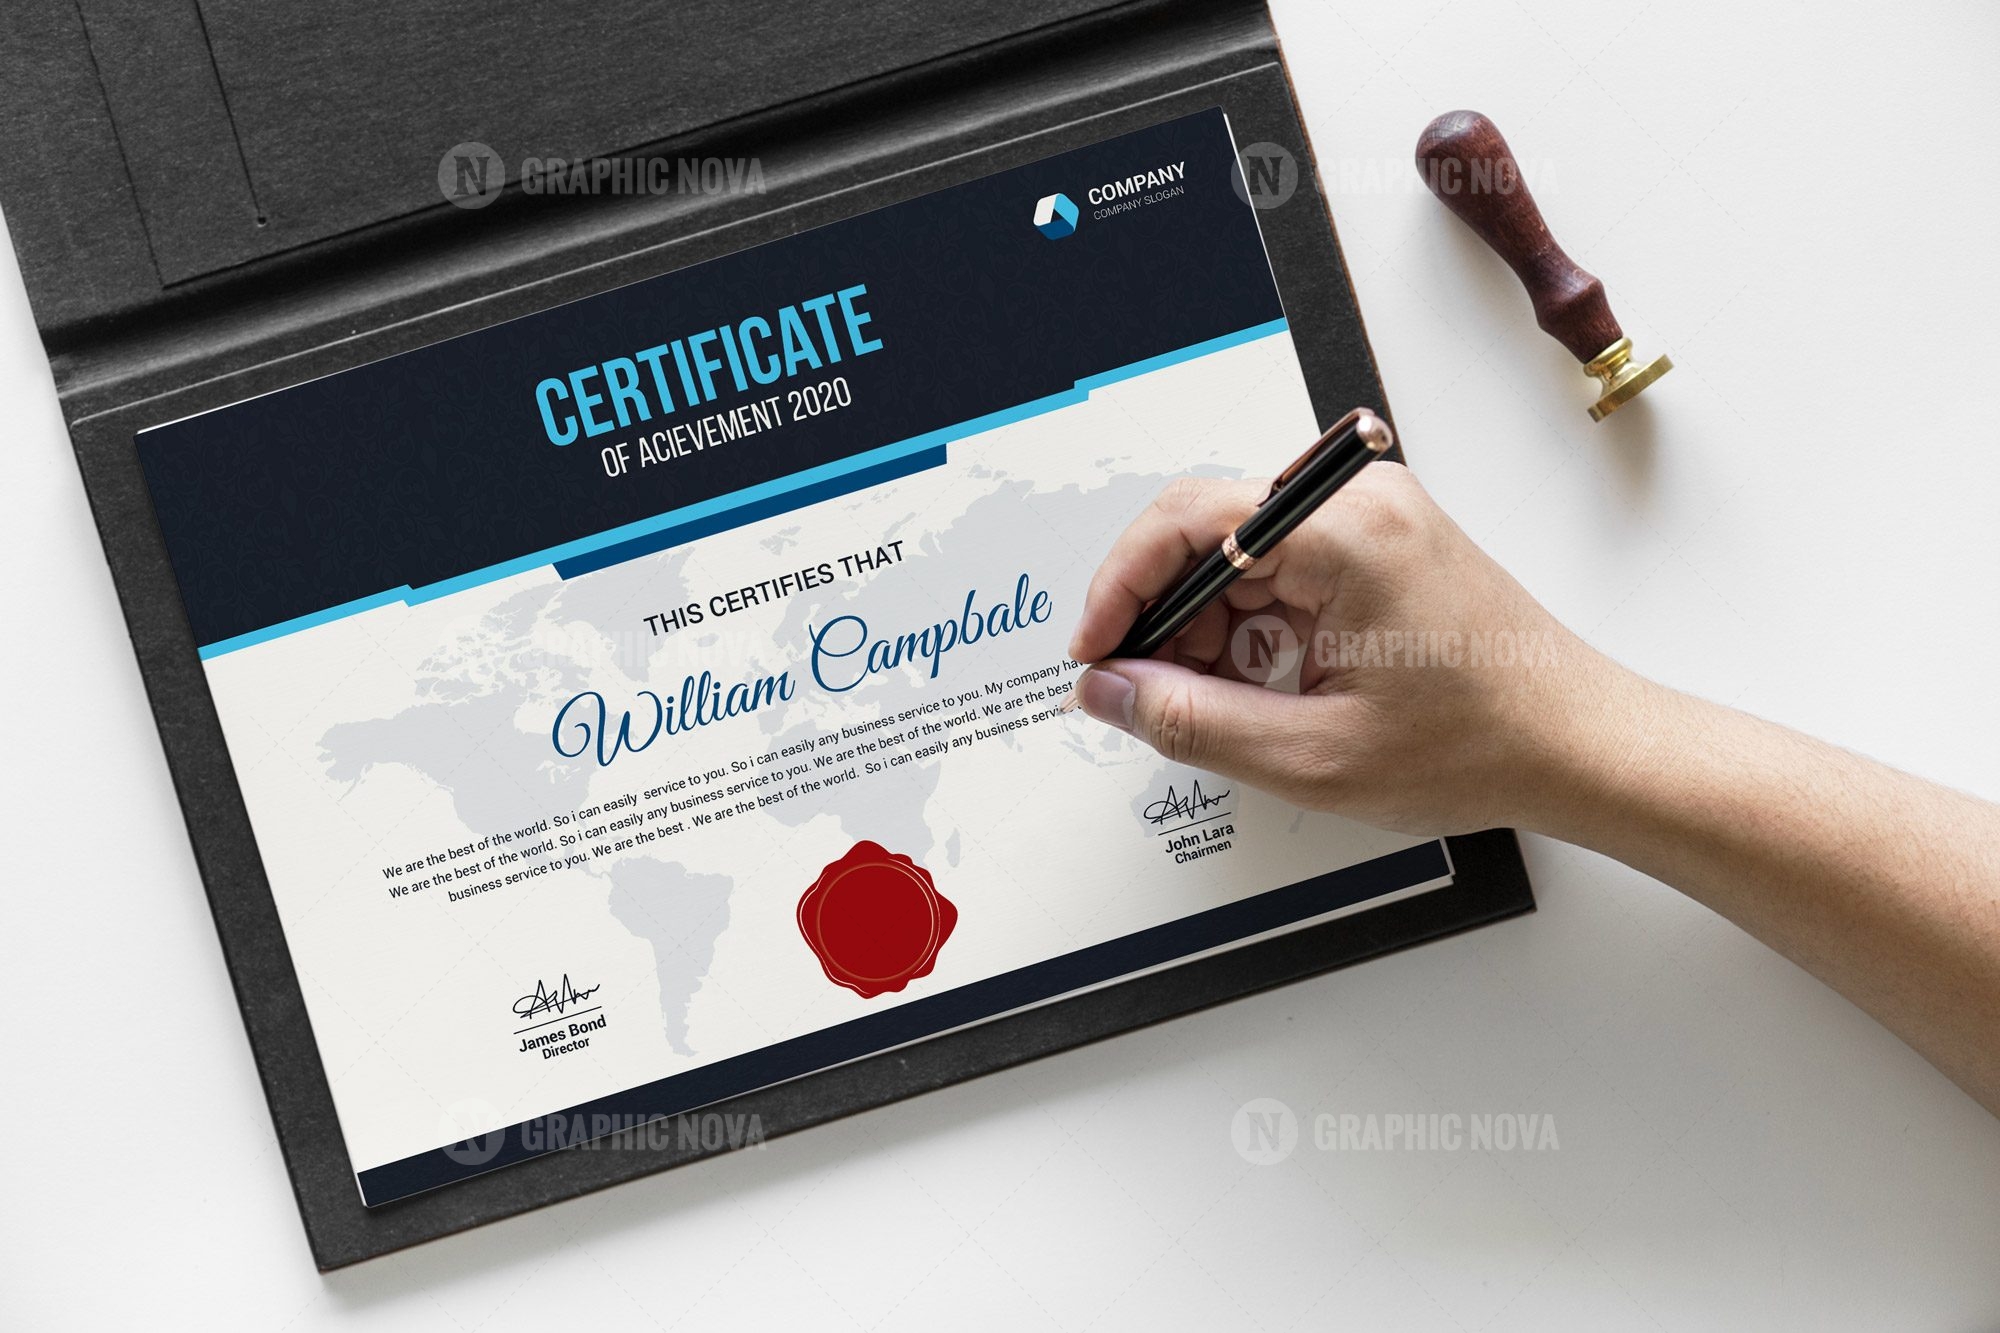 Bachelor of Certificate Template - Graphic Nova  Stock Graphic Store With Corporate Bond Certificate Template